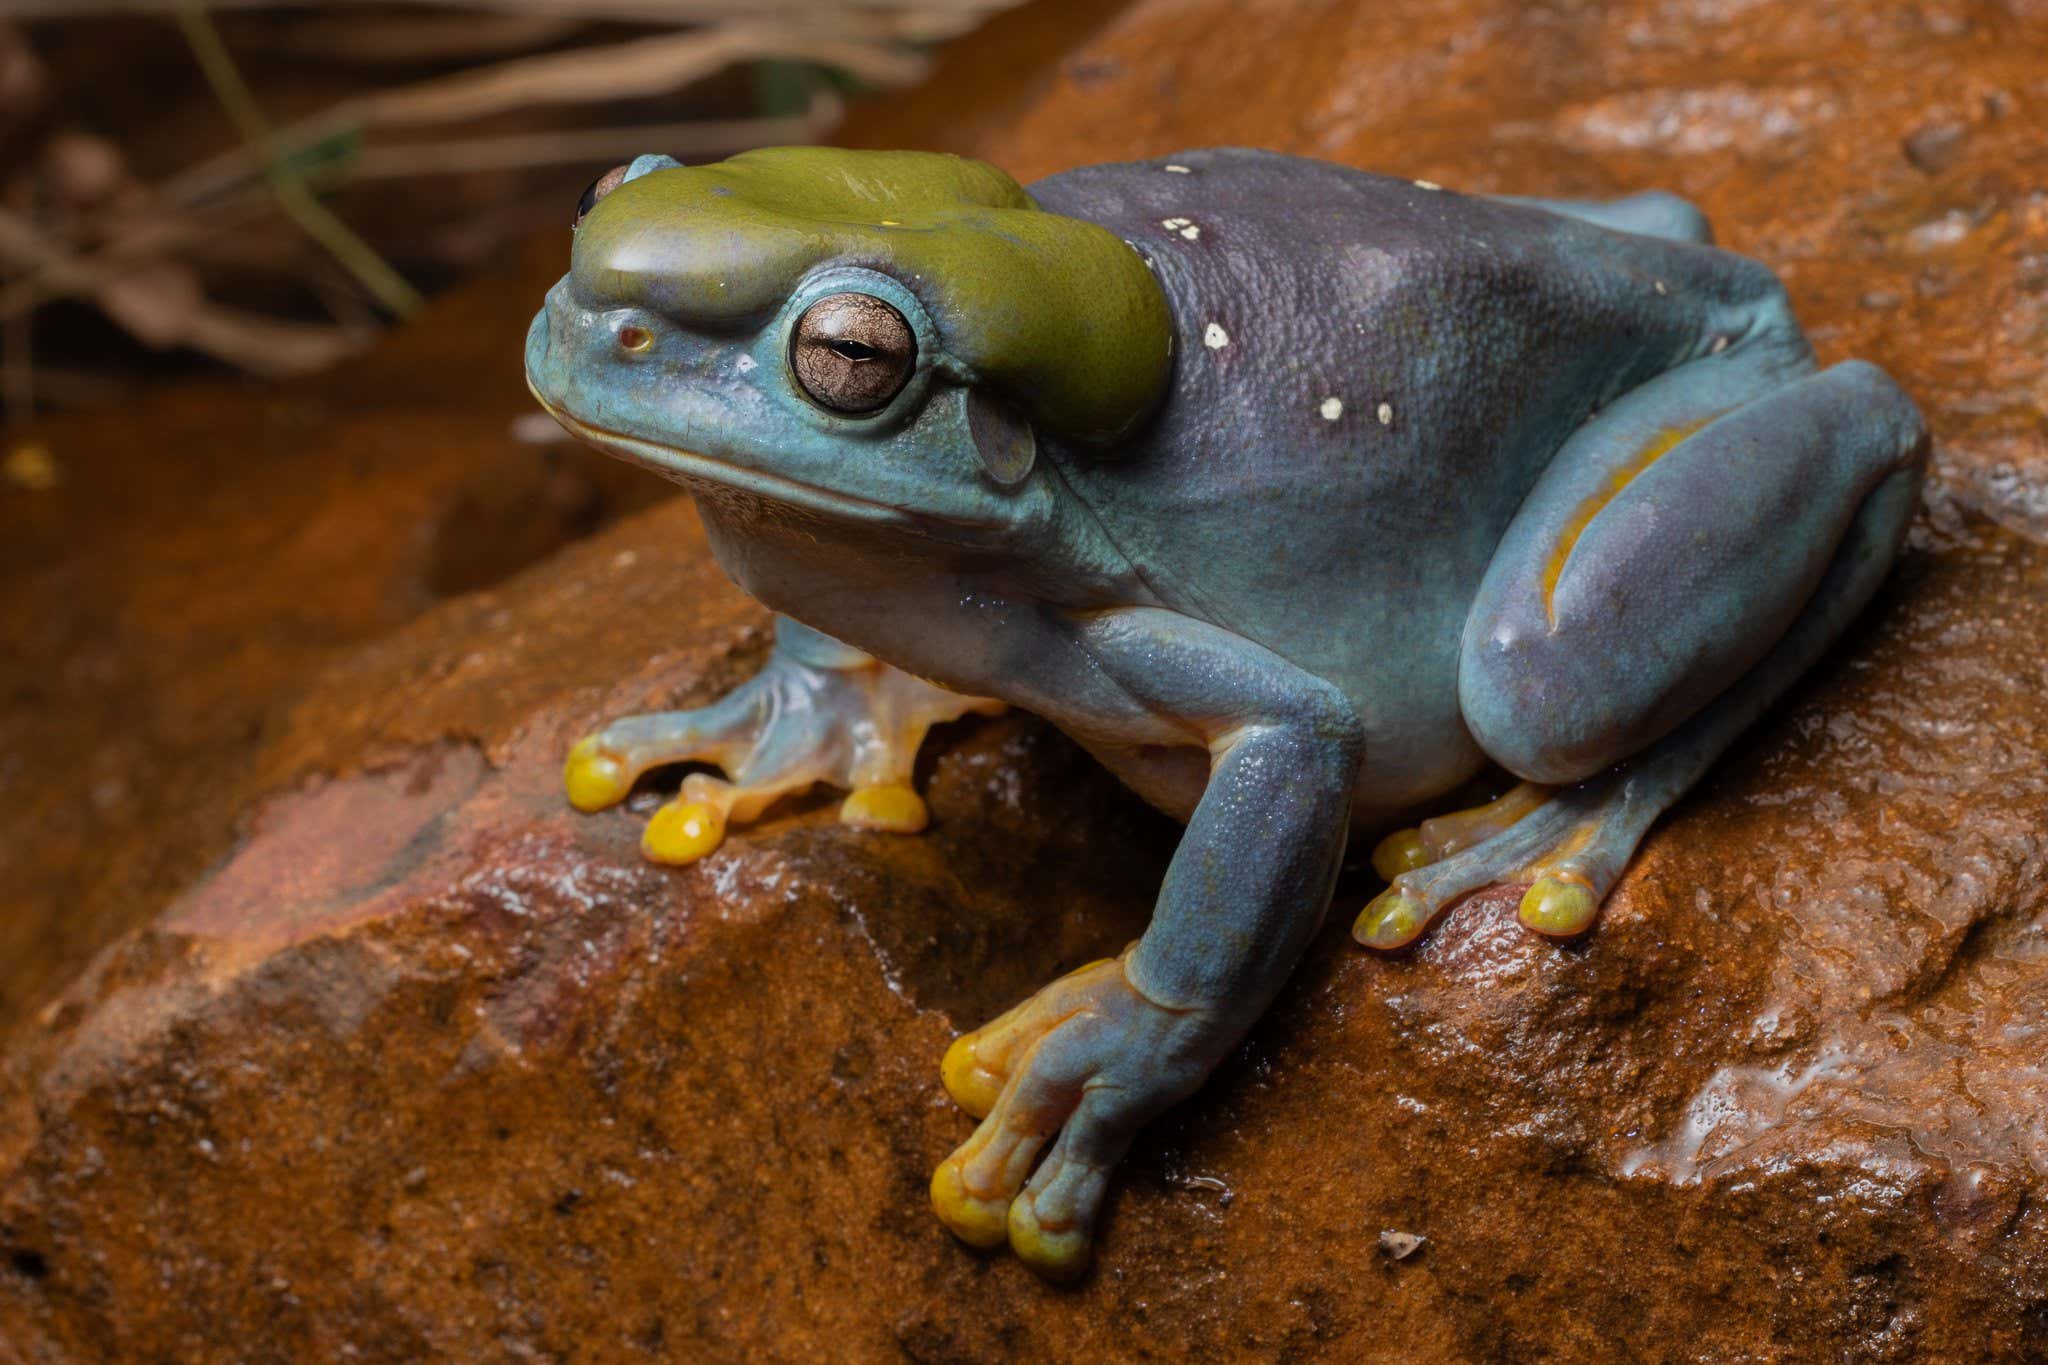 Stunning blue-skinned frog is a rare genetic mutant